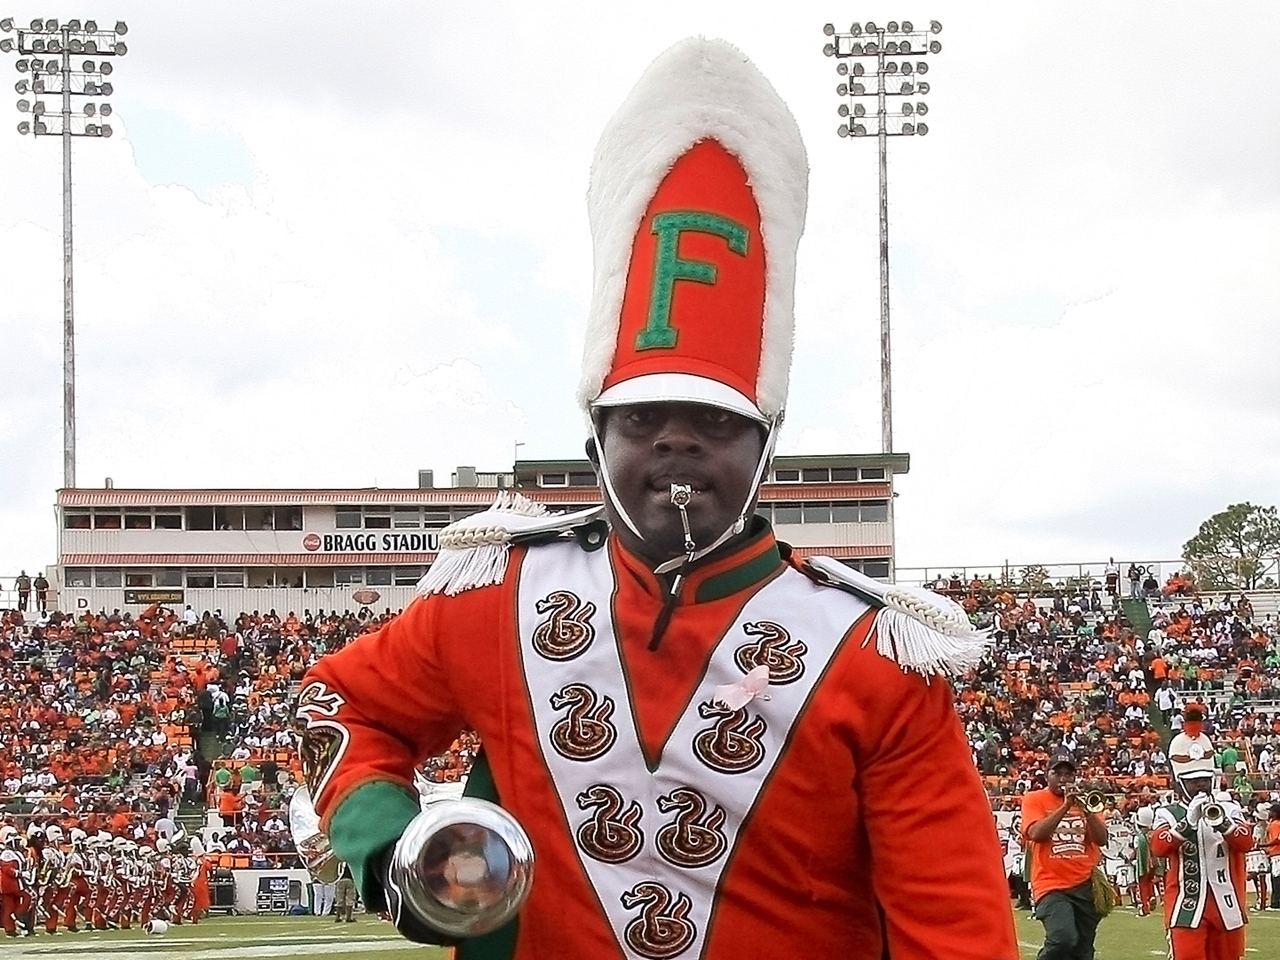 Ineligible band members implicated in FAMU hazing death of Robert Champion  - CBS News